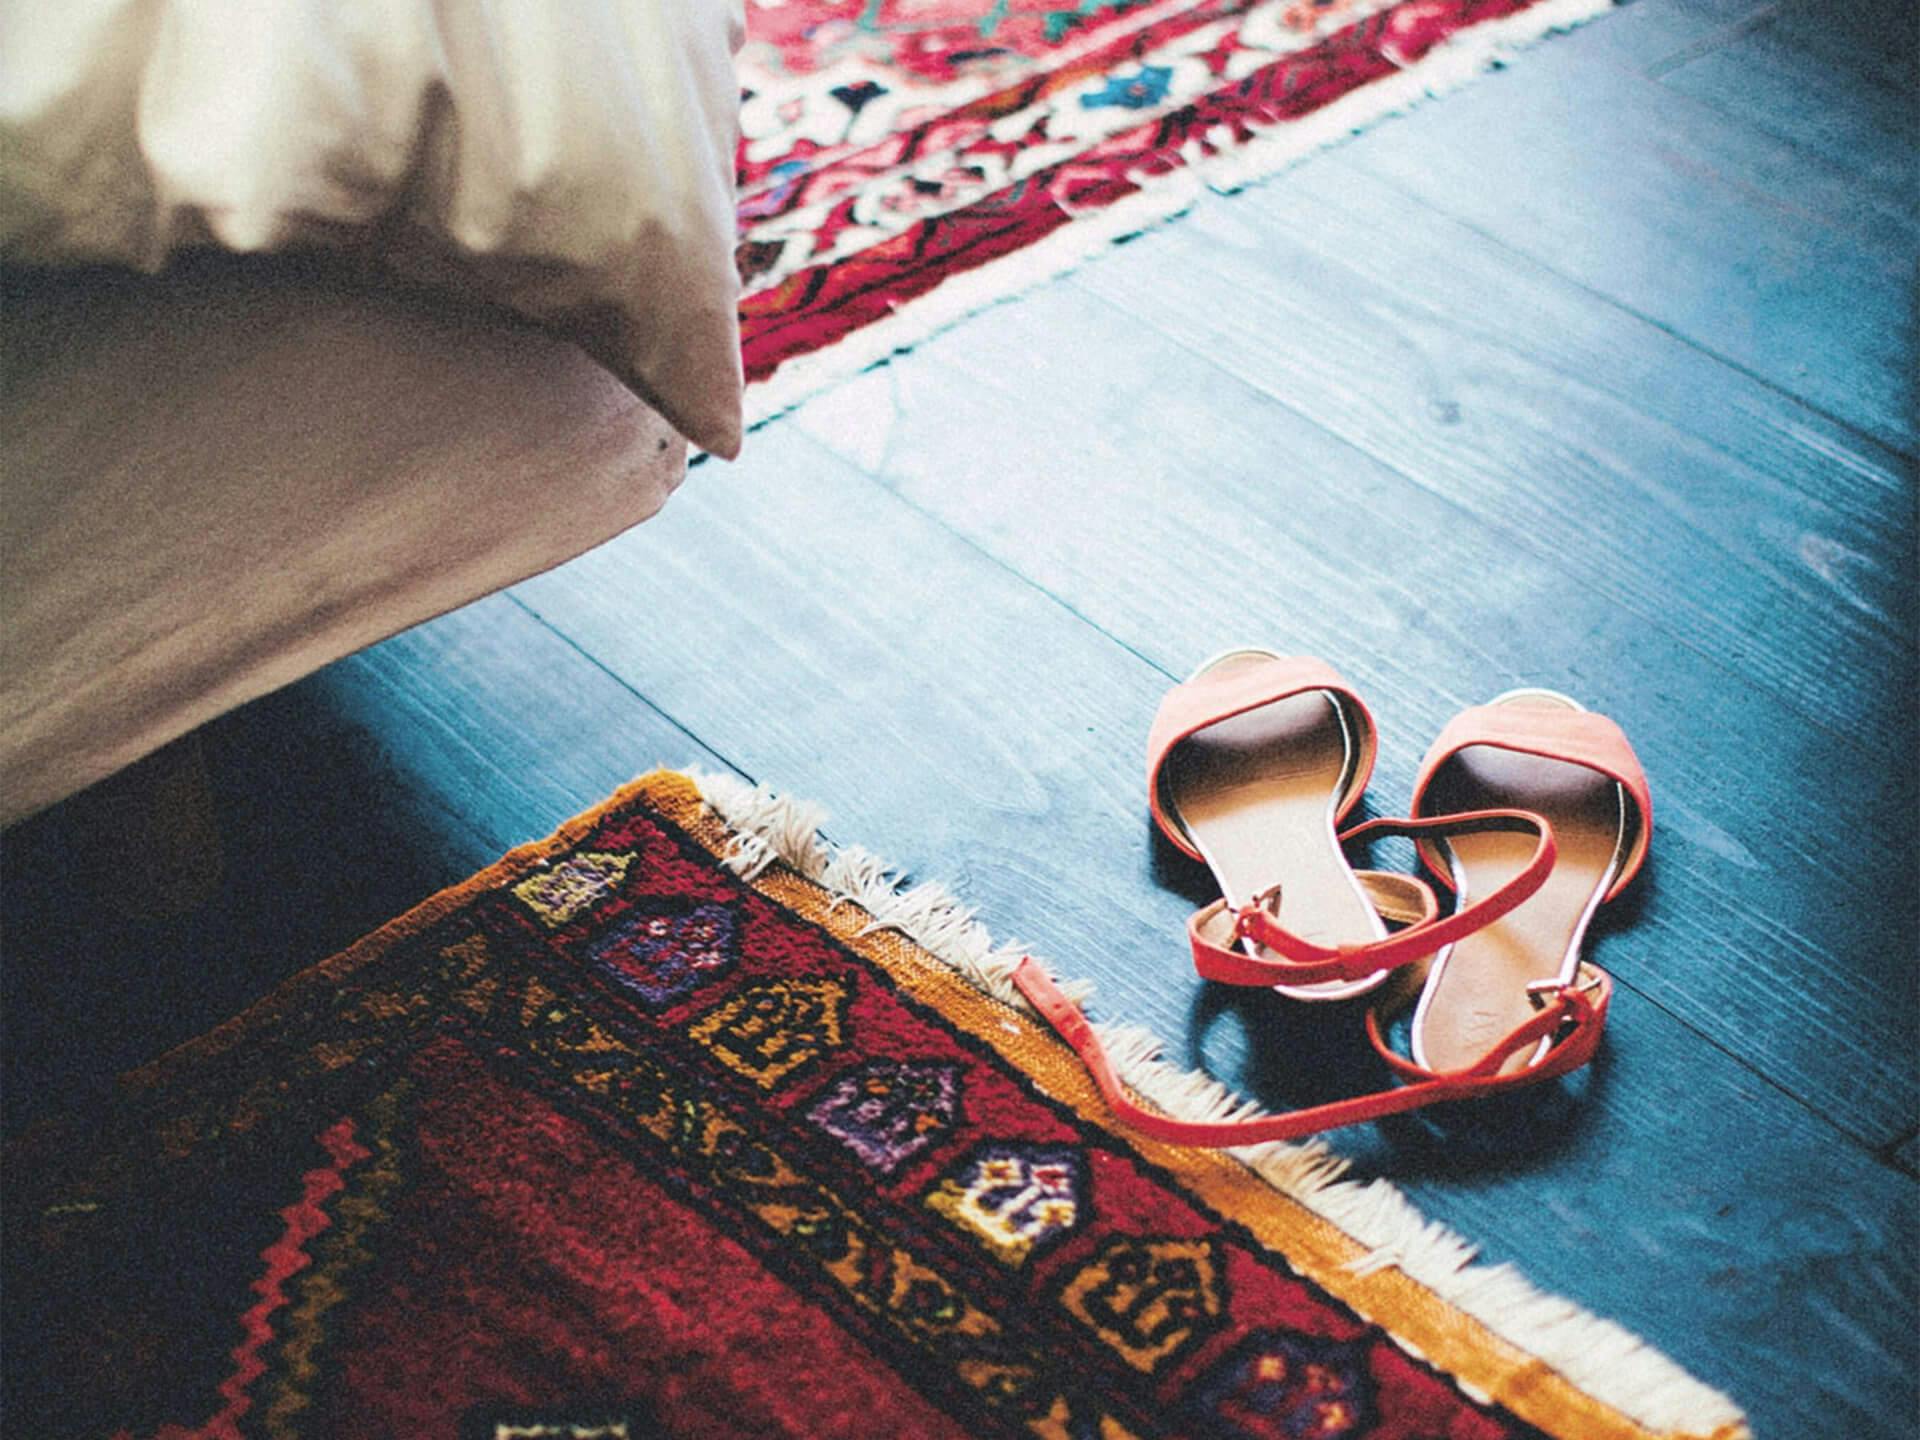 Sandals near a patterned rug